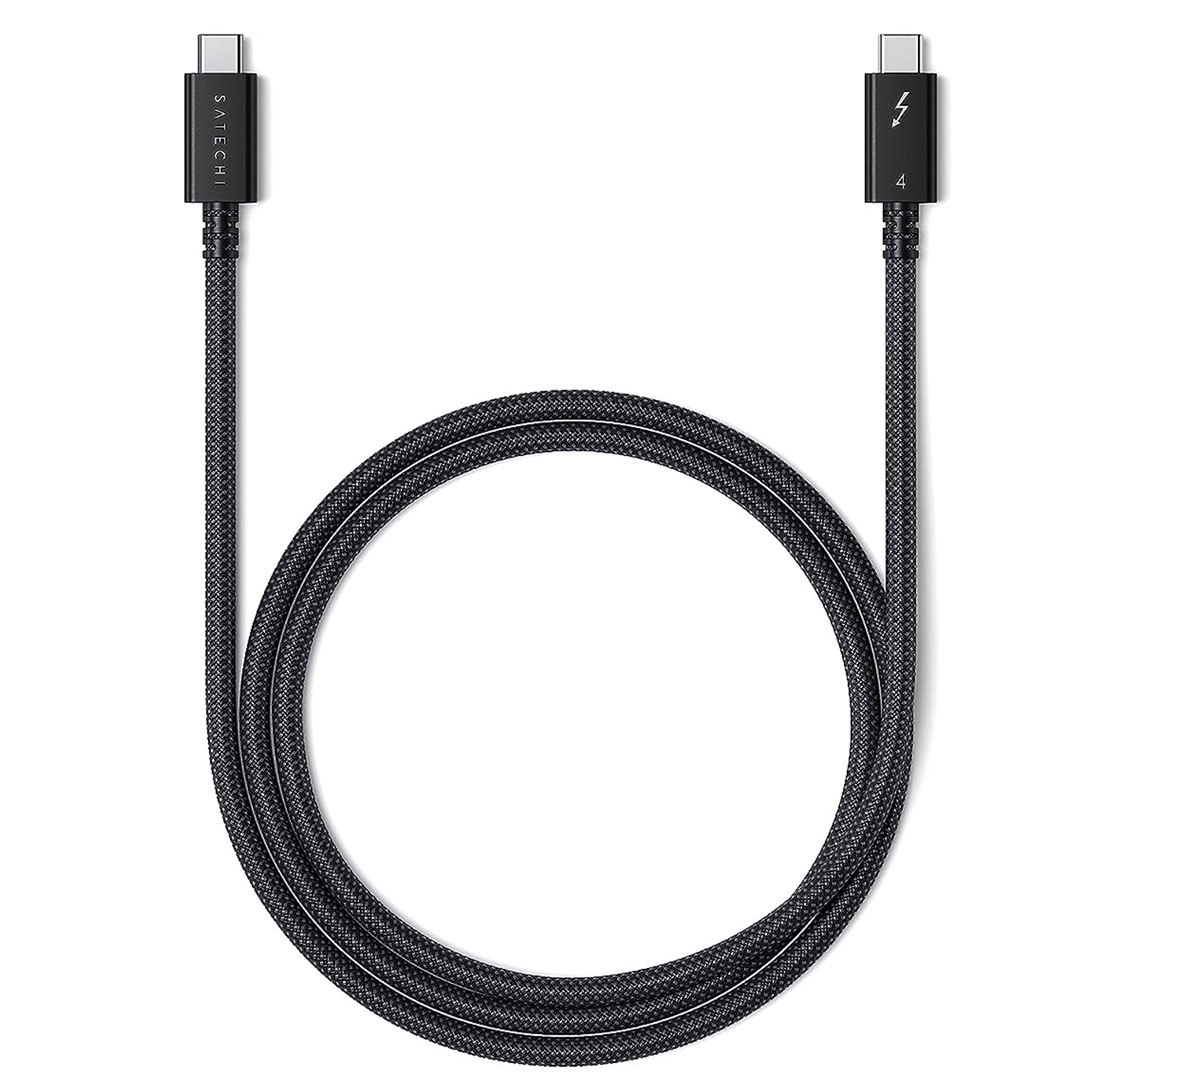 Satechi Thunderbolt 4 Pro Cable (1m) – Best 240W PD Thunderbolt 4 cable